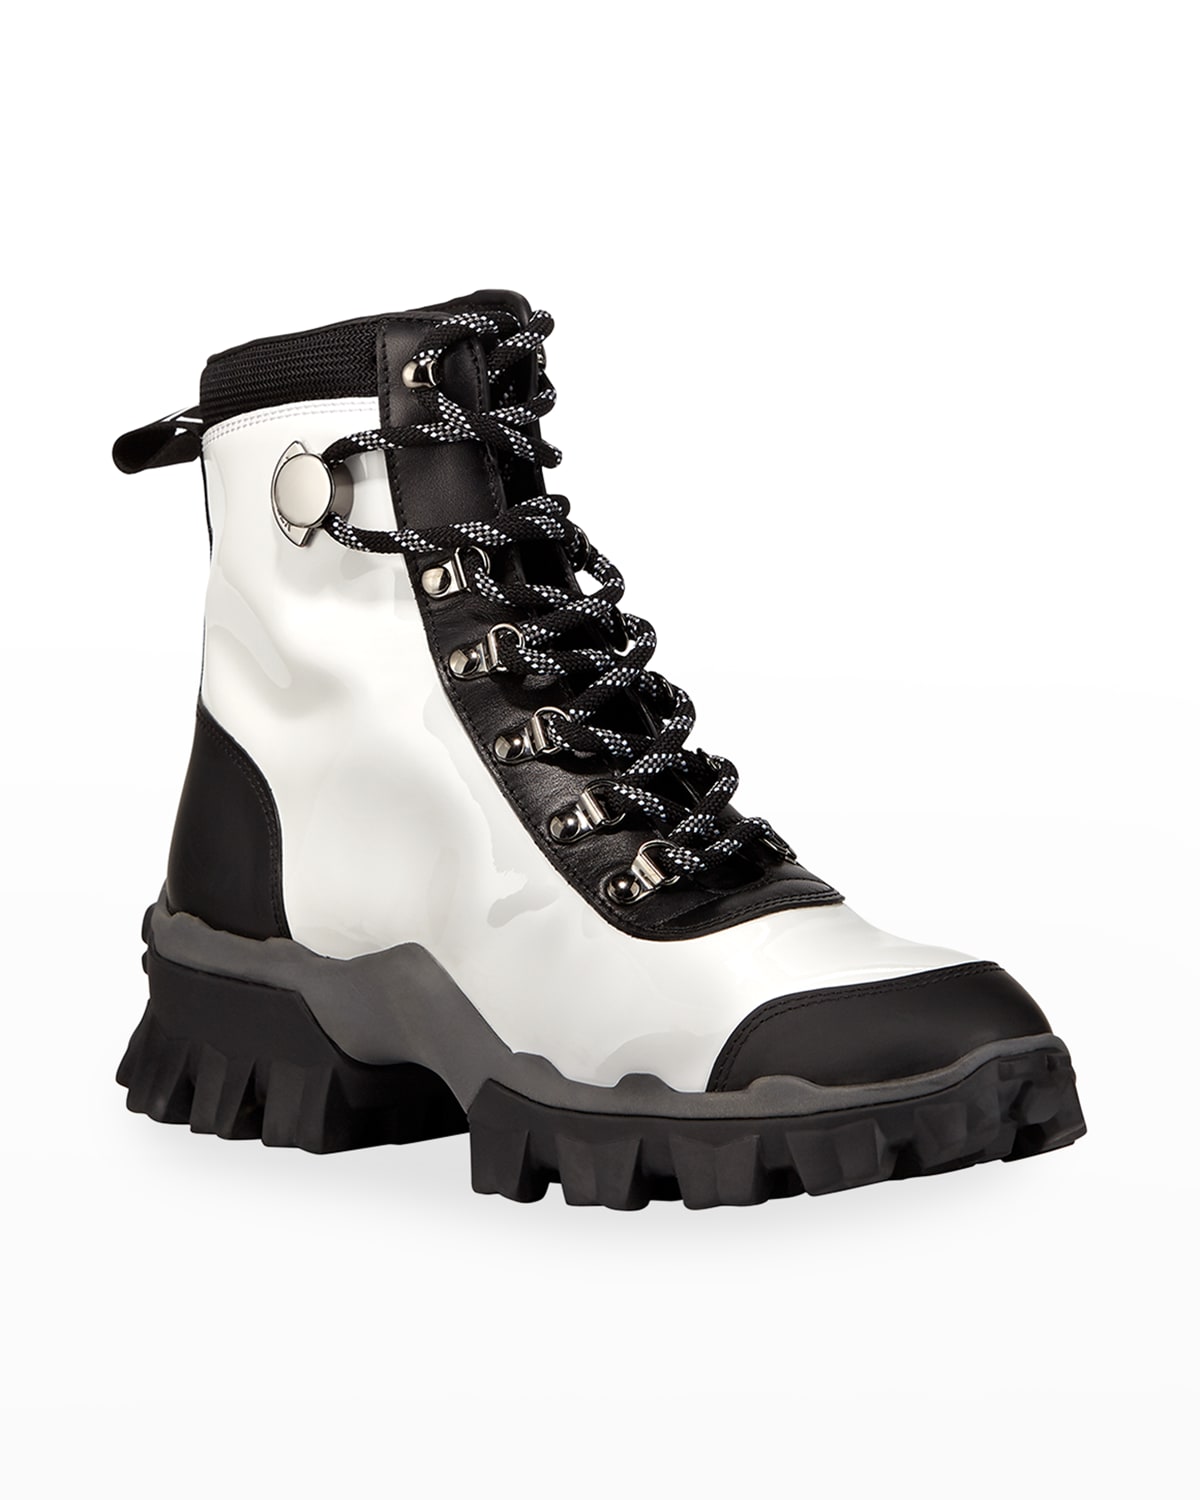 Moncler Helis Stivale Leather Lace-up Hiking Combat Boots In White/black